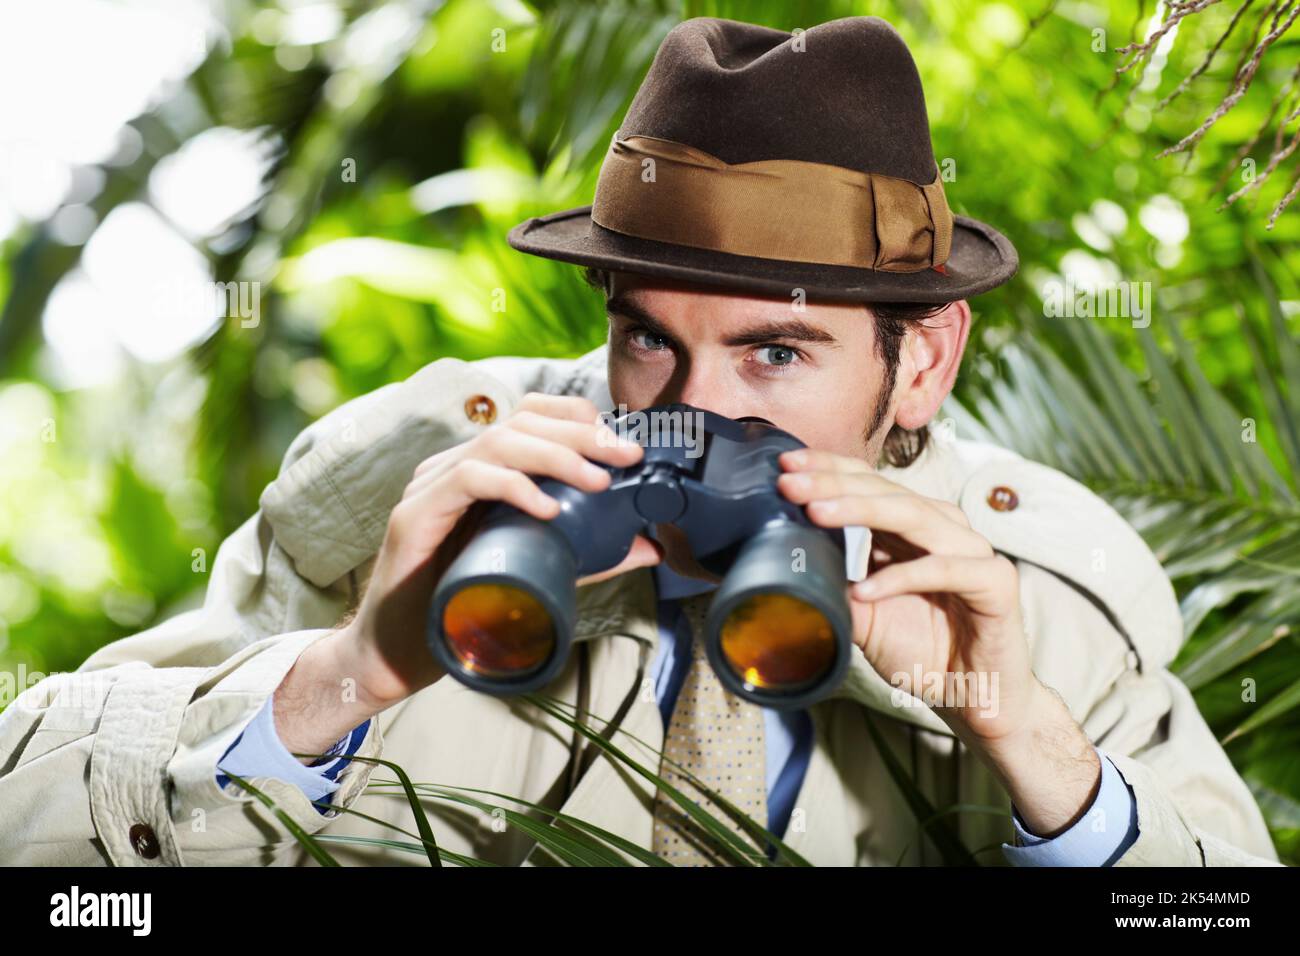 He doesnt miss a thing. Private investigator using binoculars to spy on someone from the bushes. Stock Photo